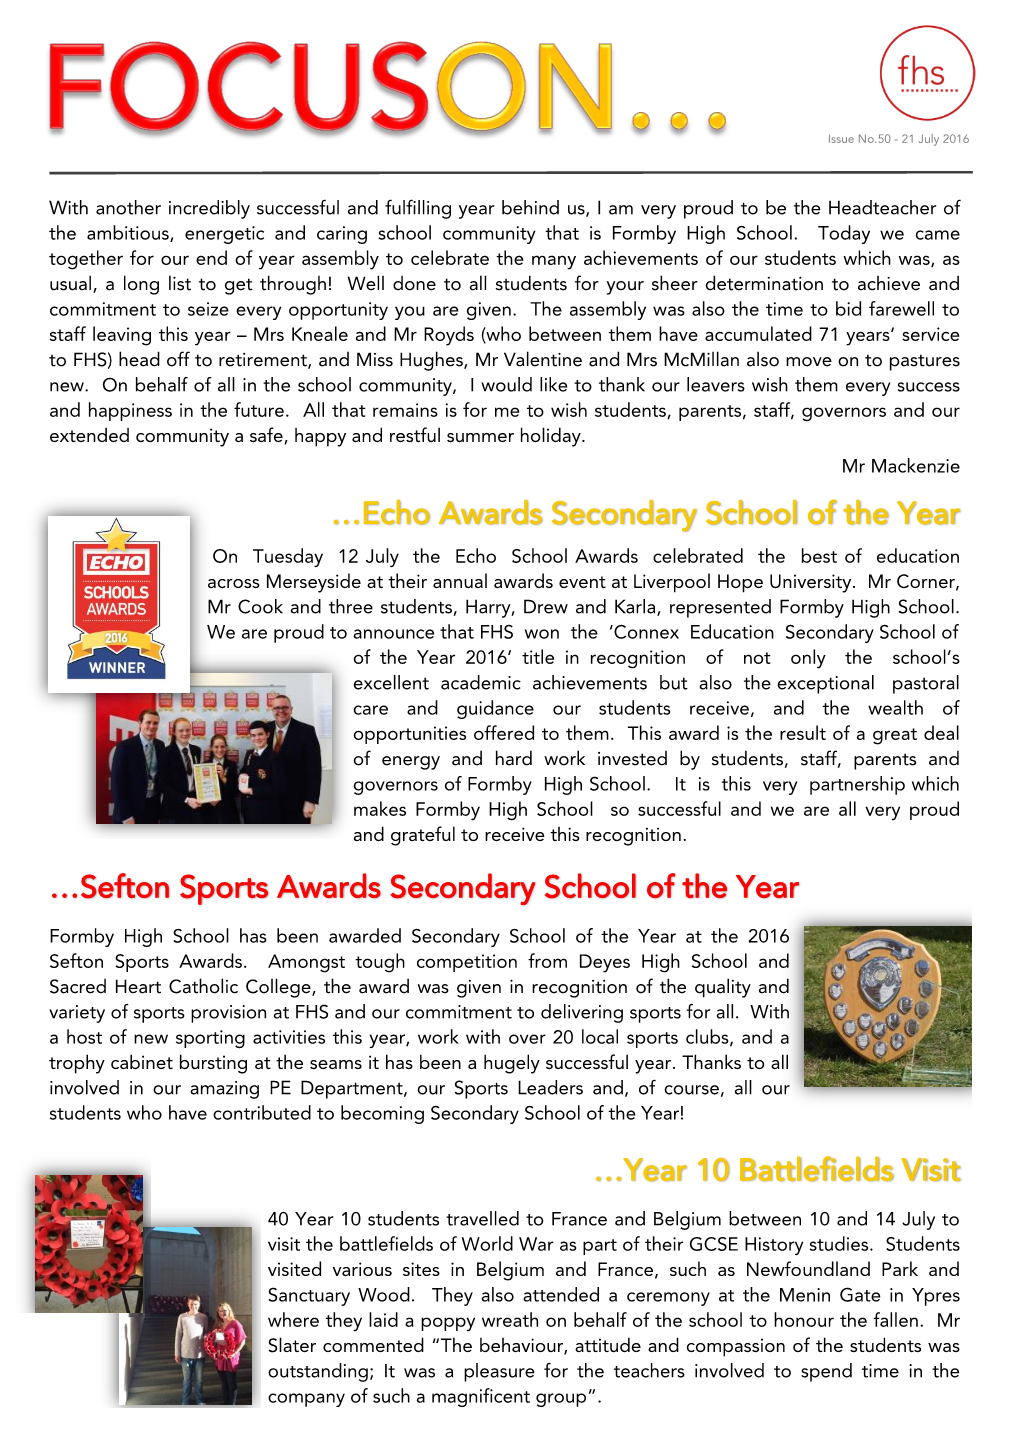 …Echo Awards Secondary School of the Year …Sefton Sports Awards Secondary School of the Year …Year 10 Battlefields Visit